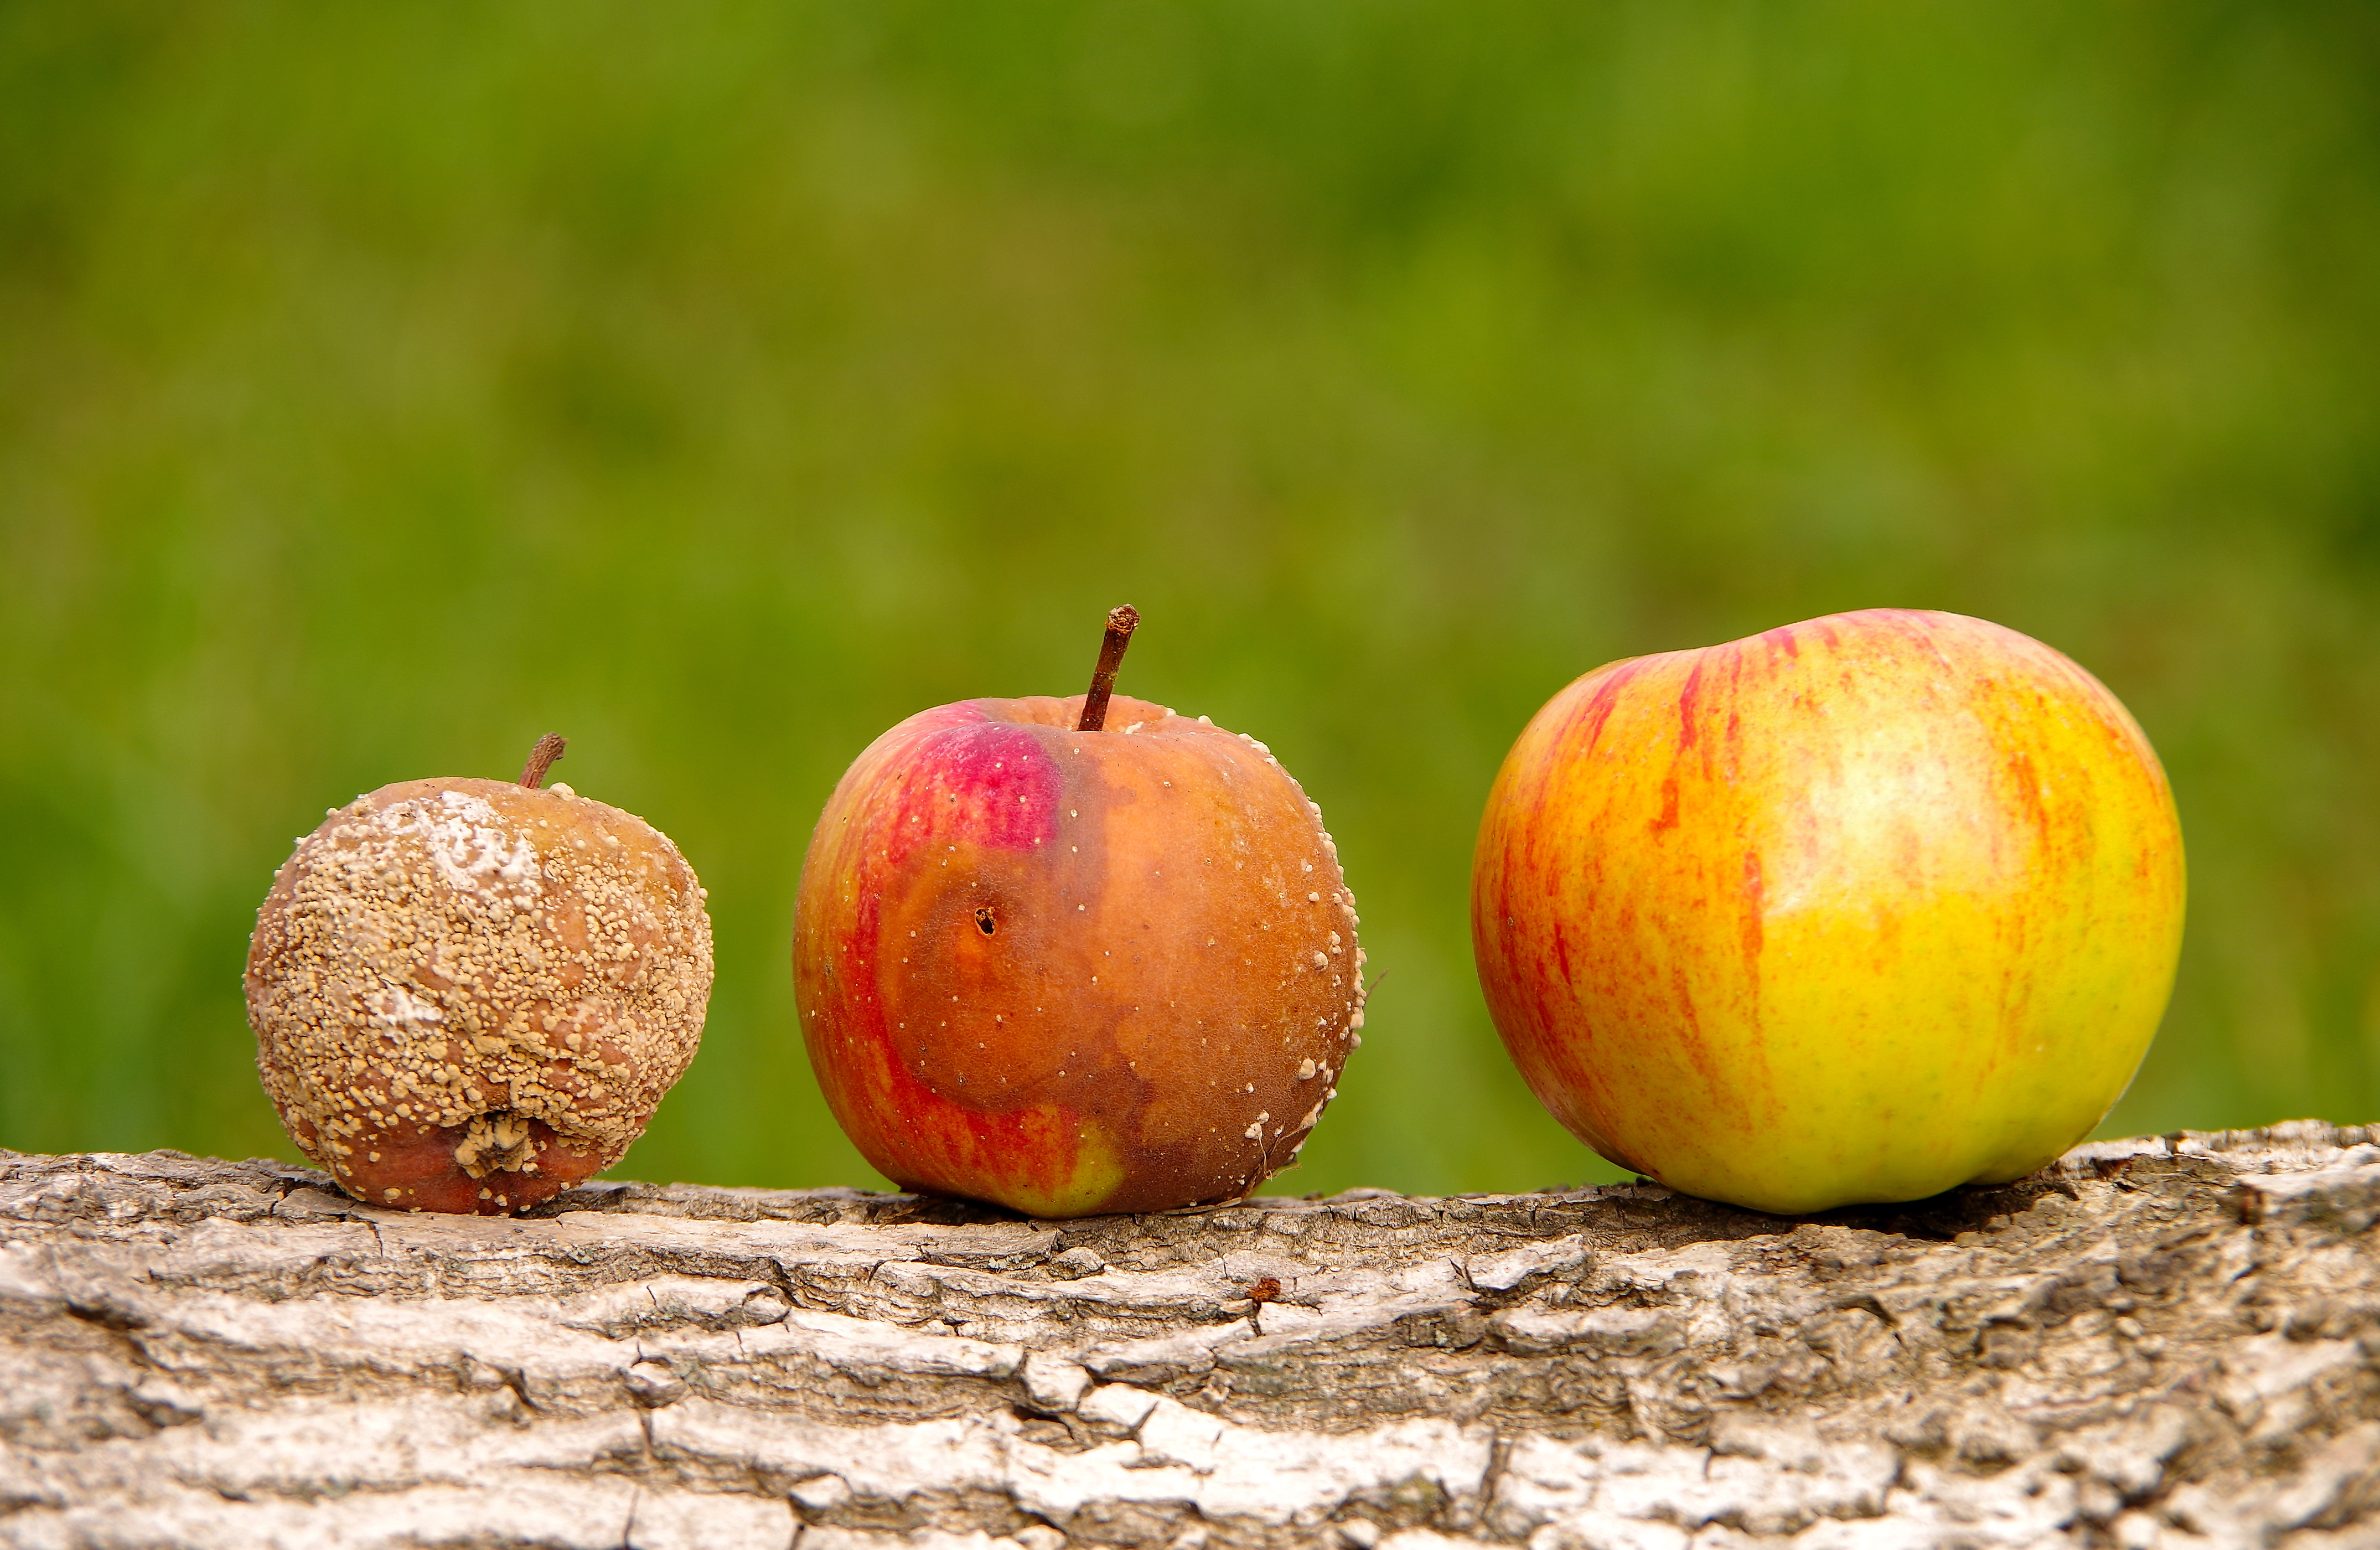 Three apples on a log with green grass in background. L to R: small mold-covered apple, slightly larger apple with bruises and some mold, larger unblemished apple.